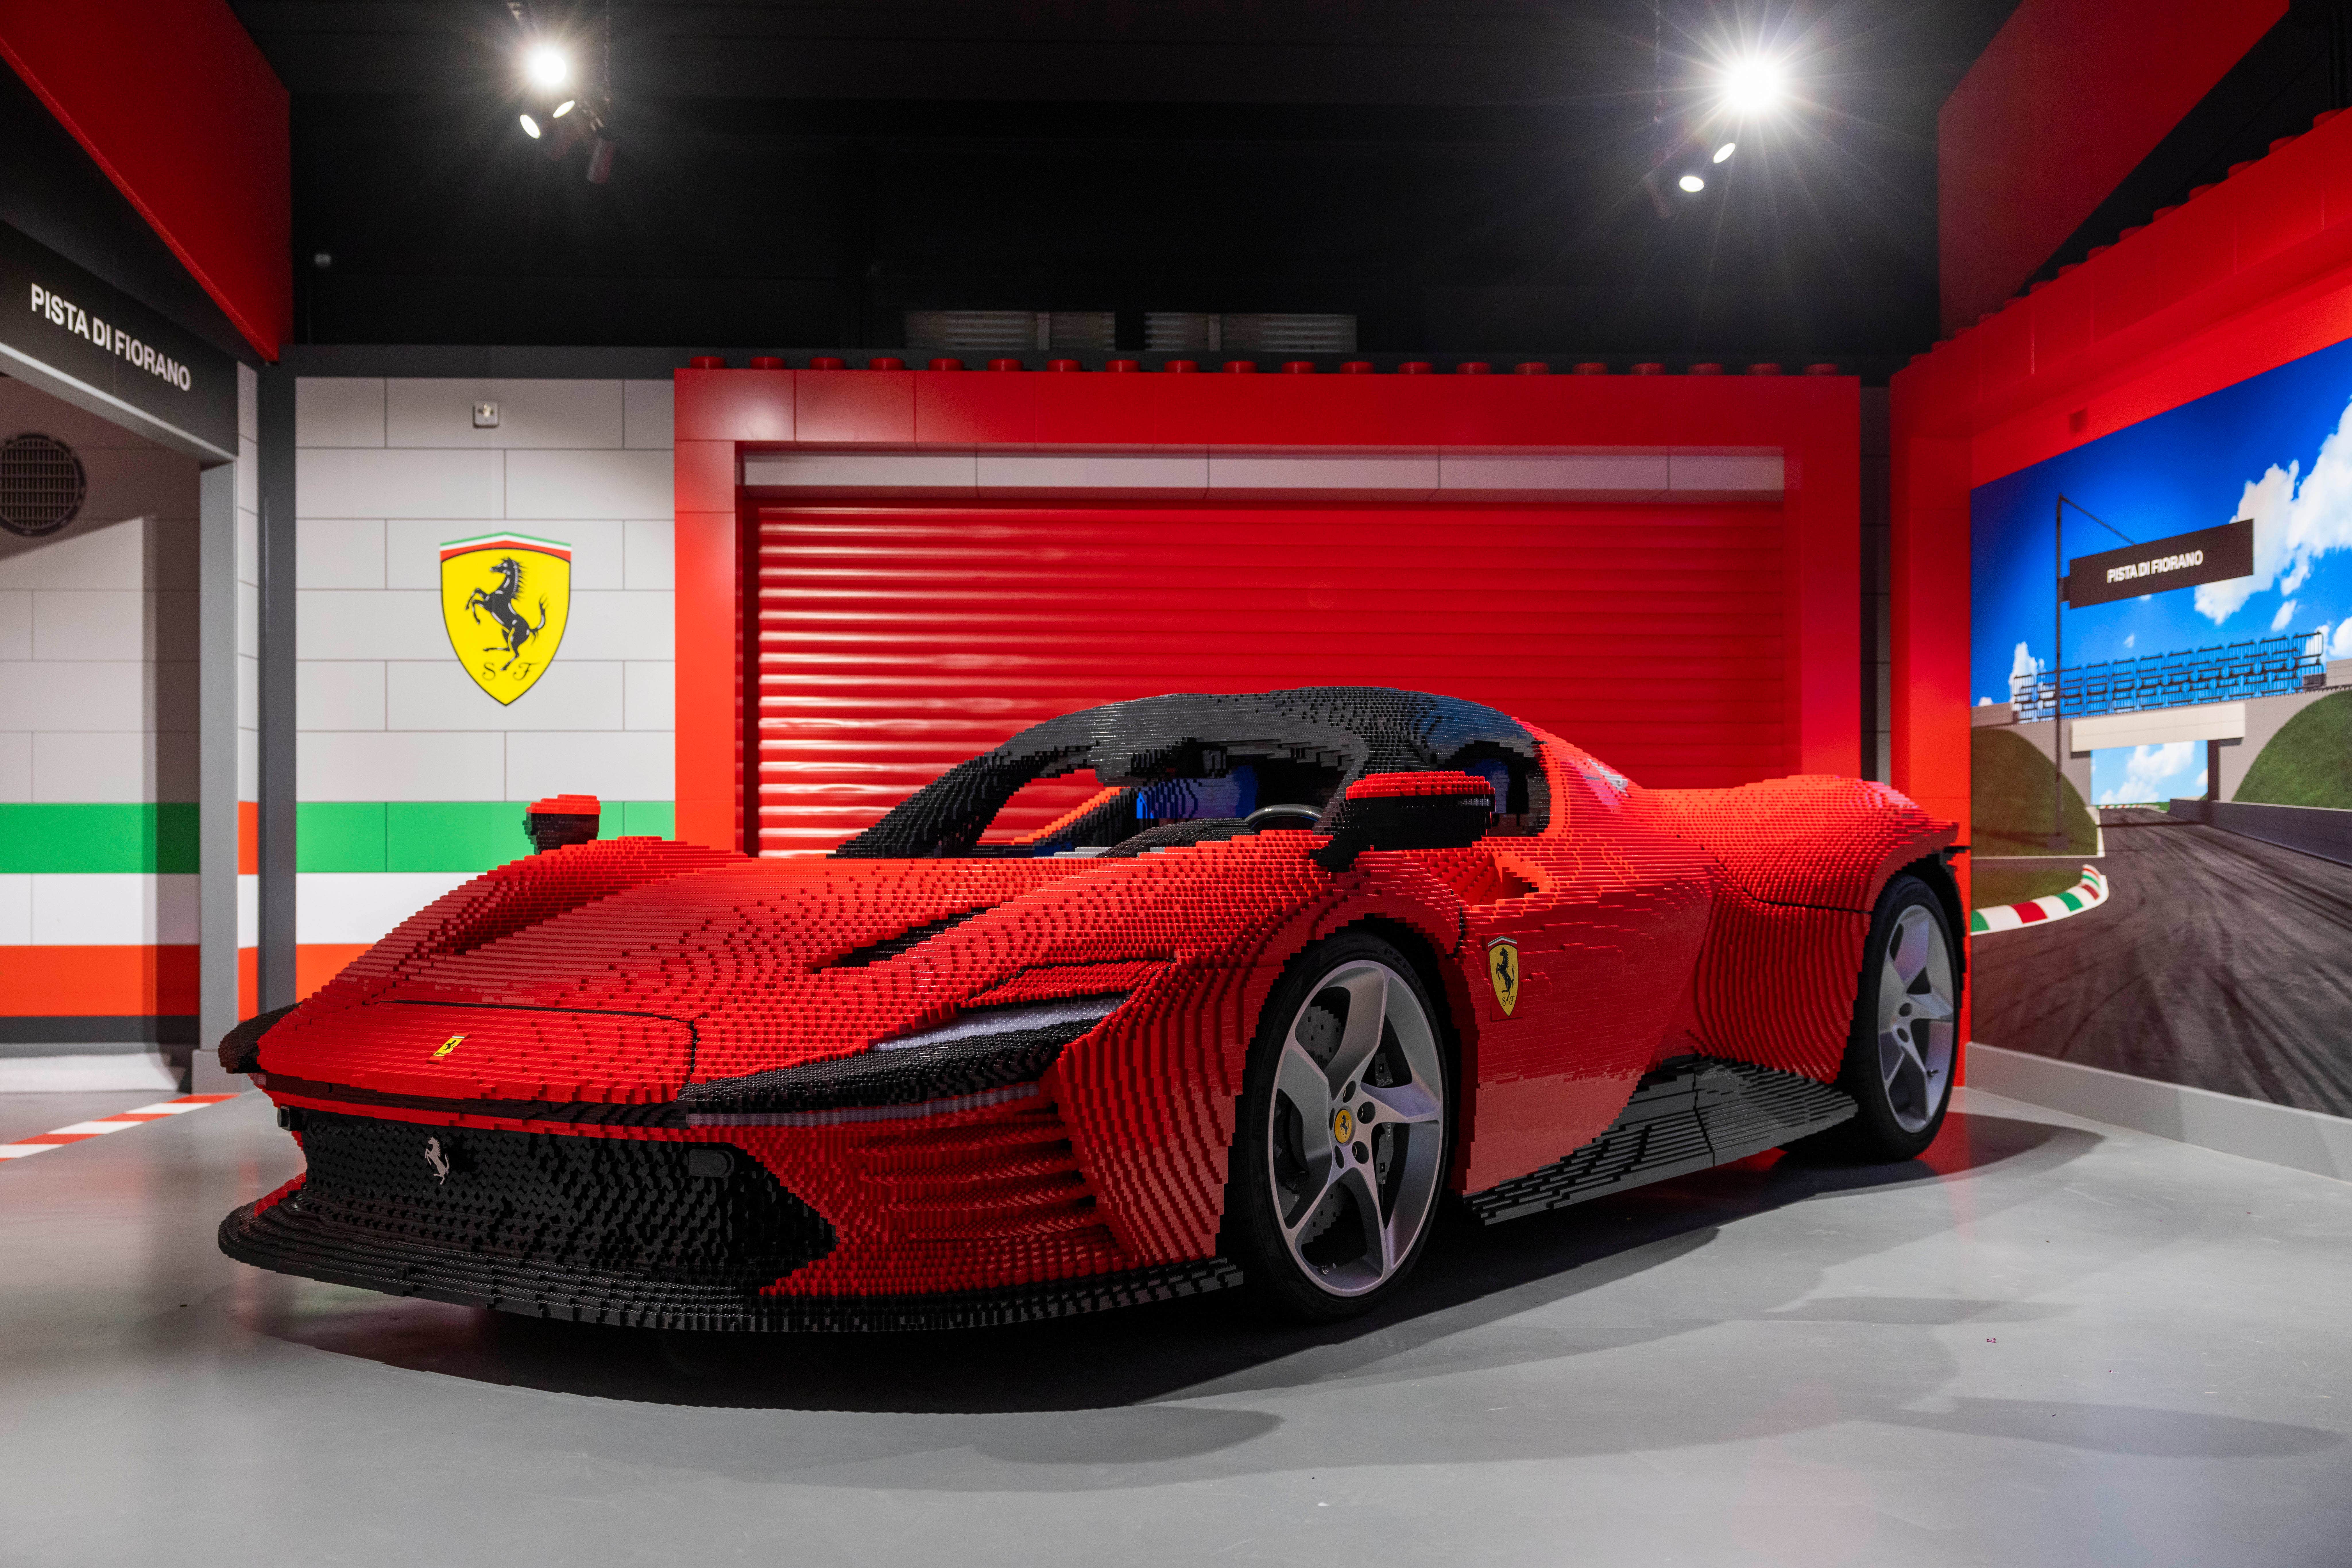 model luxury sports unveiled | The Independent